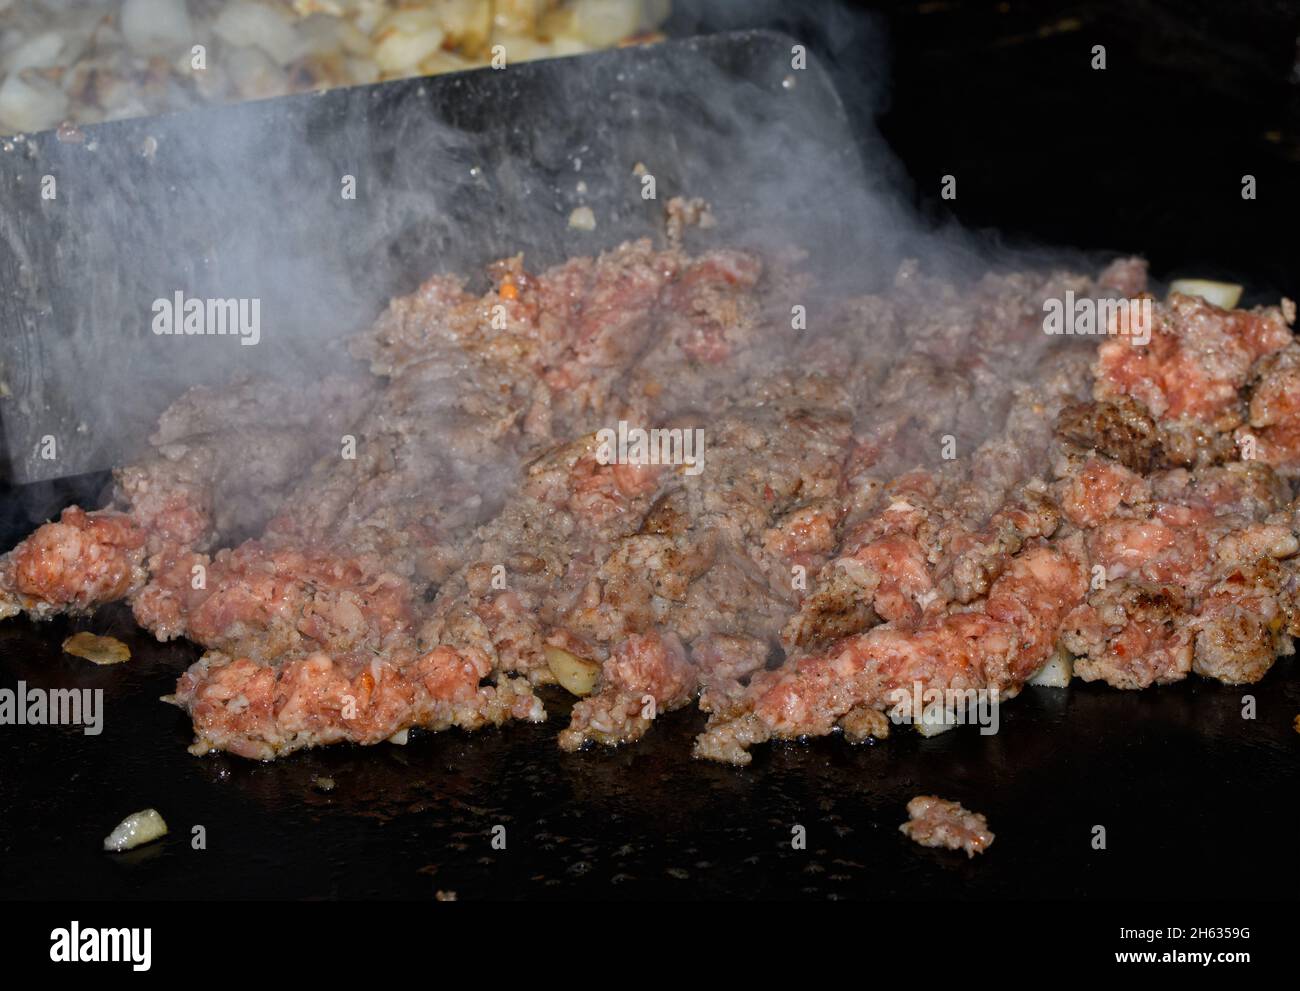 Ground sausage being cooked on griddle in preparation for breakfast casserole; with heavy steam rising, and a metal spatula on the background moving t Stock Photo